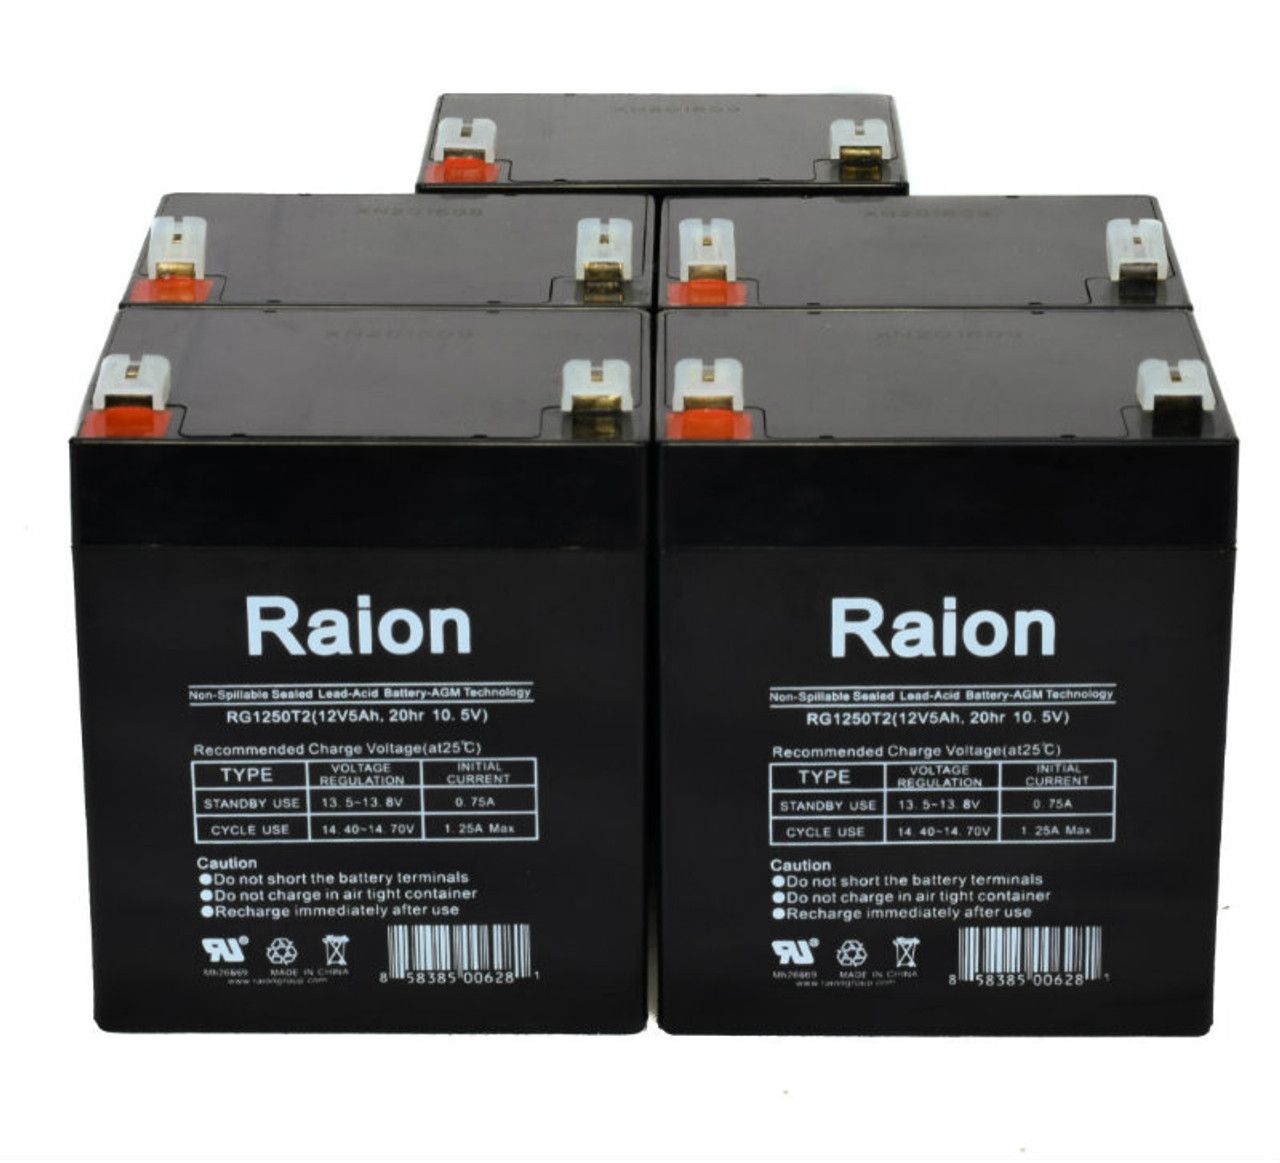 Raion Power RG1250T1 Replacement Fire Alarm Control Panel Battery for Alarm Lock RBAT4 - 8 Pack